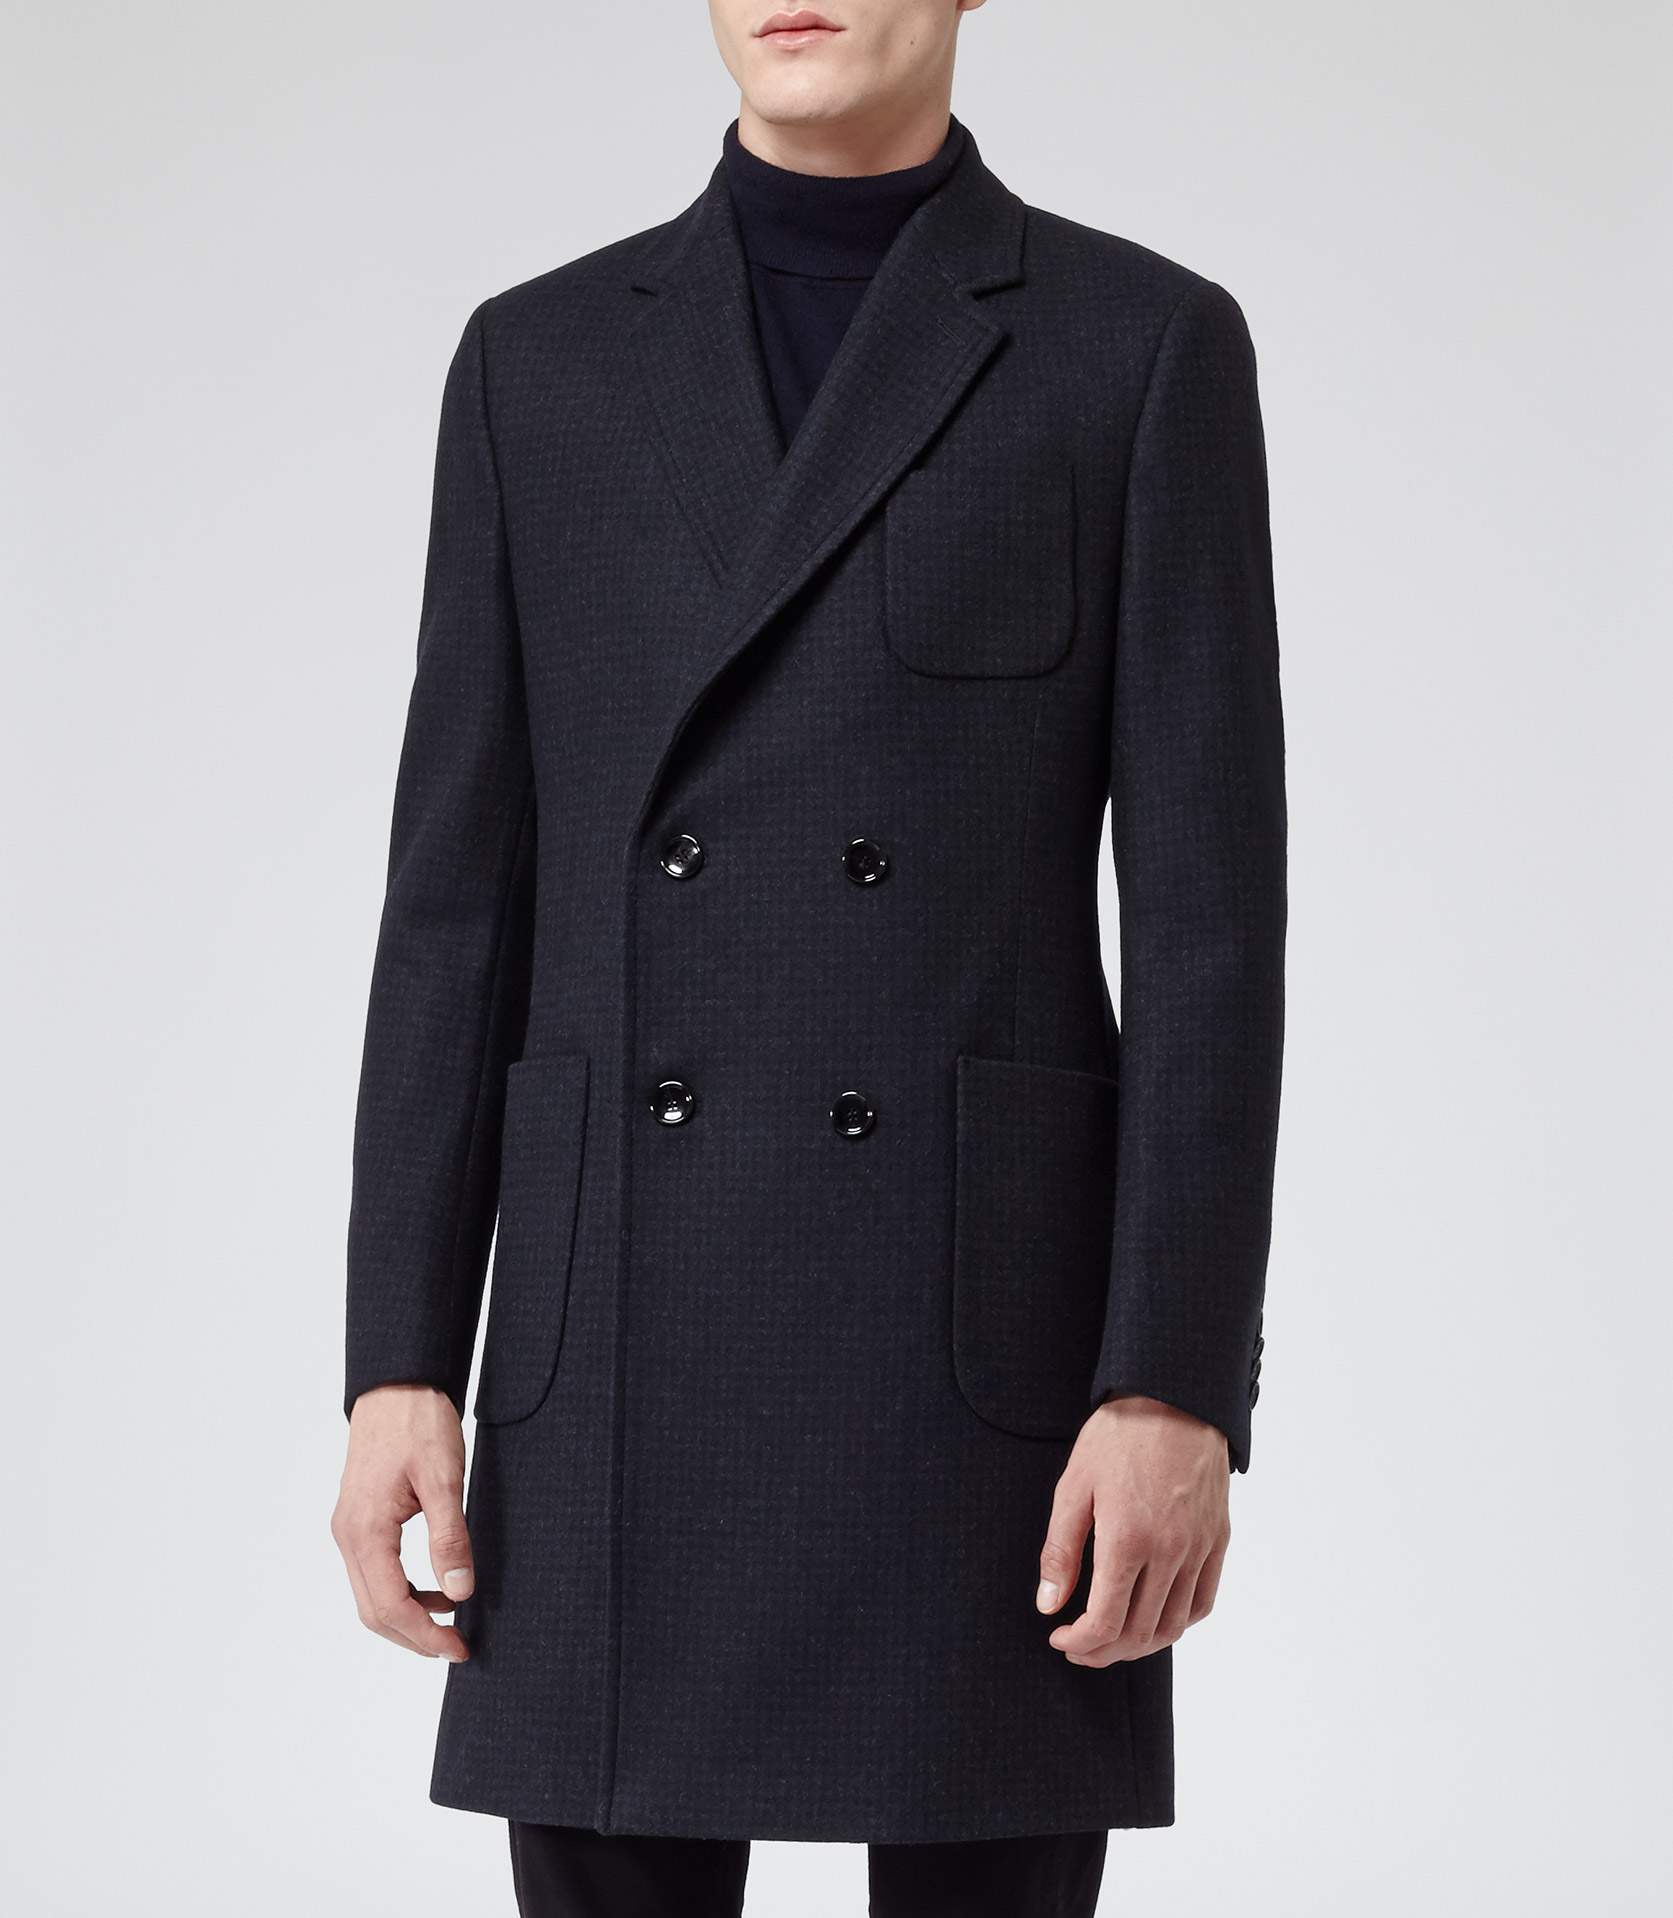 Reiss Jeremy Double Breasted Check Coat in Black for Men - Lyst